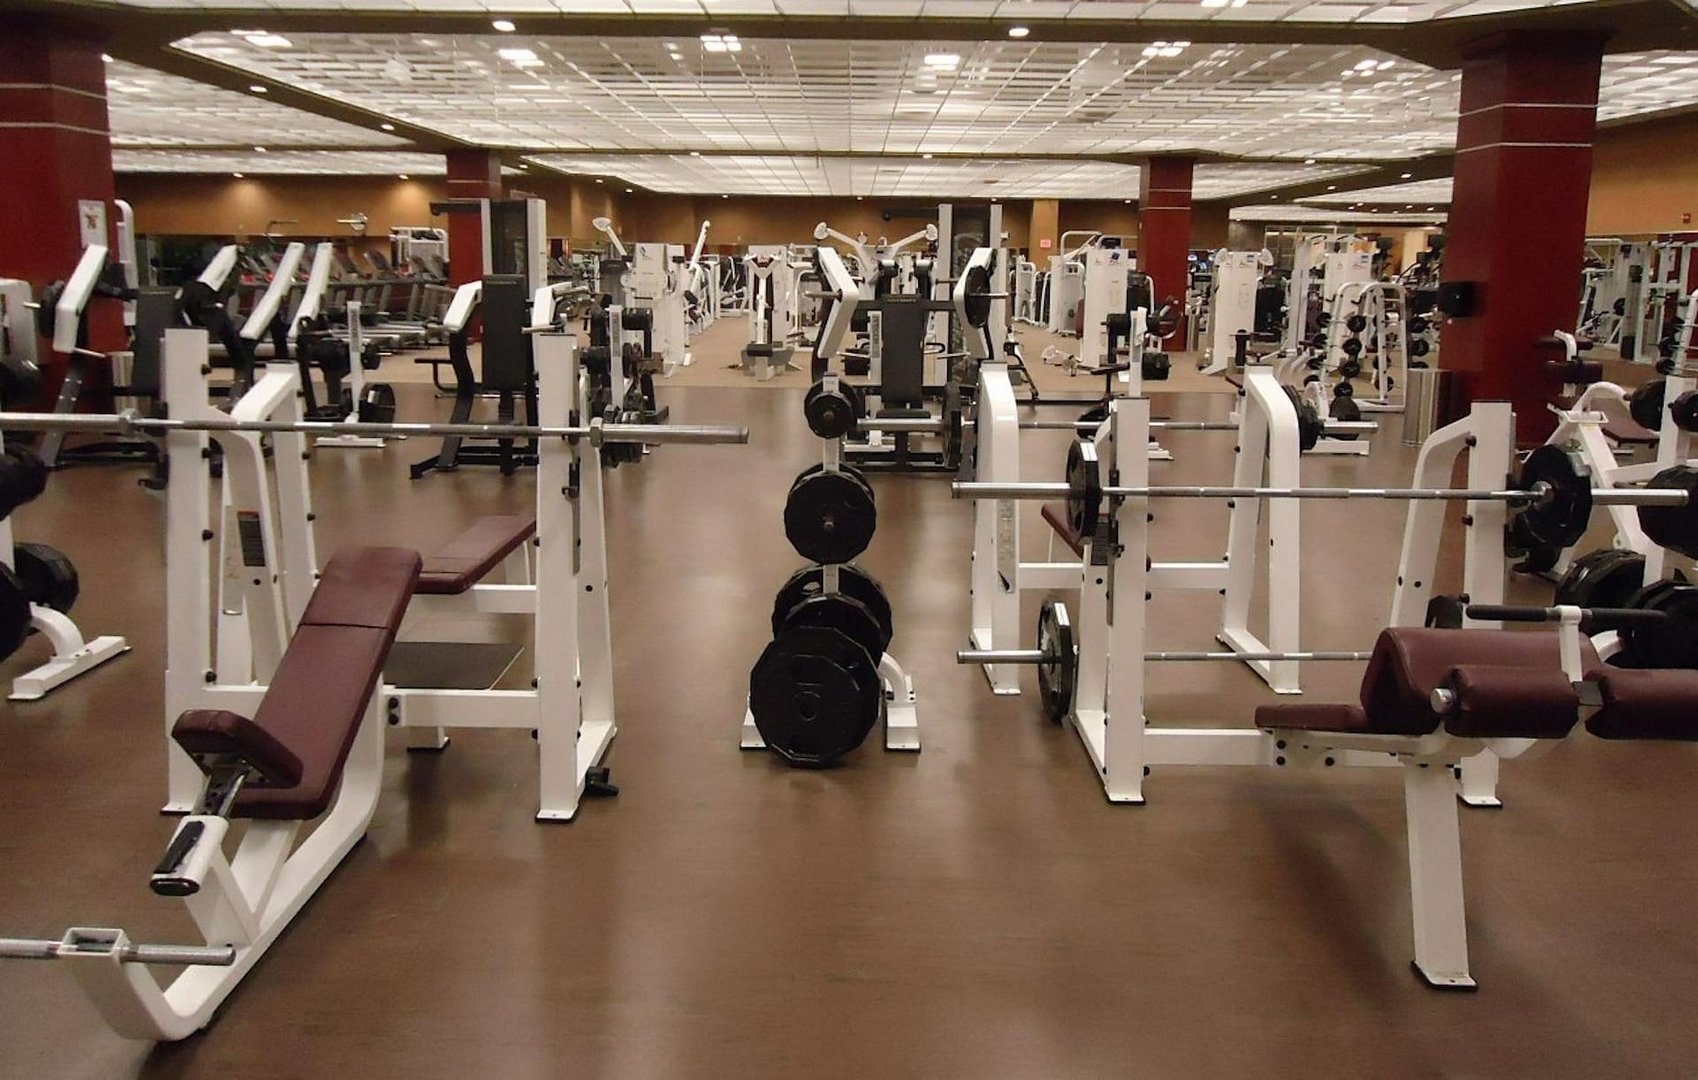 Less than a quarter of gyms operating legally